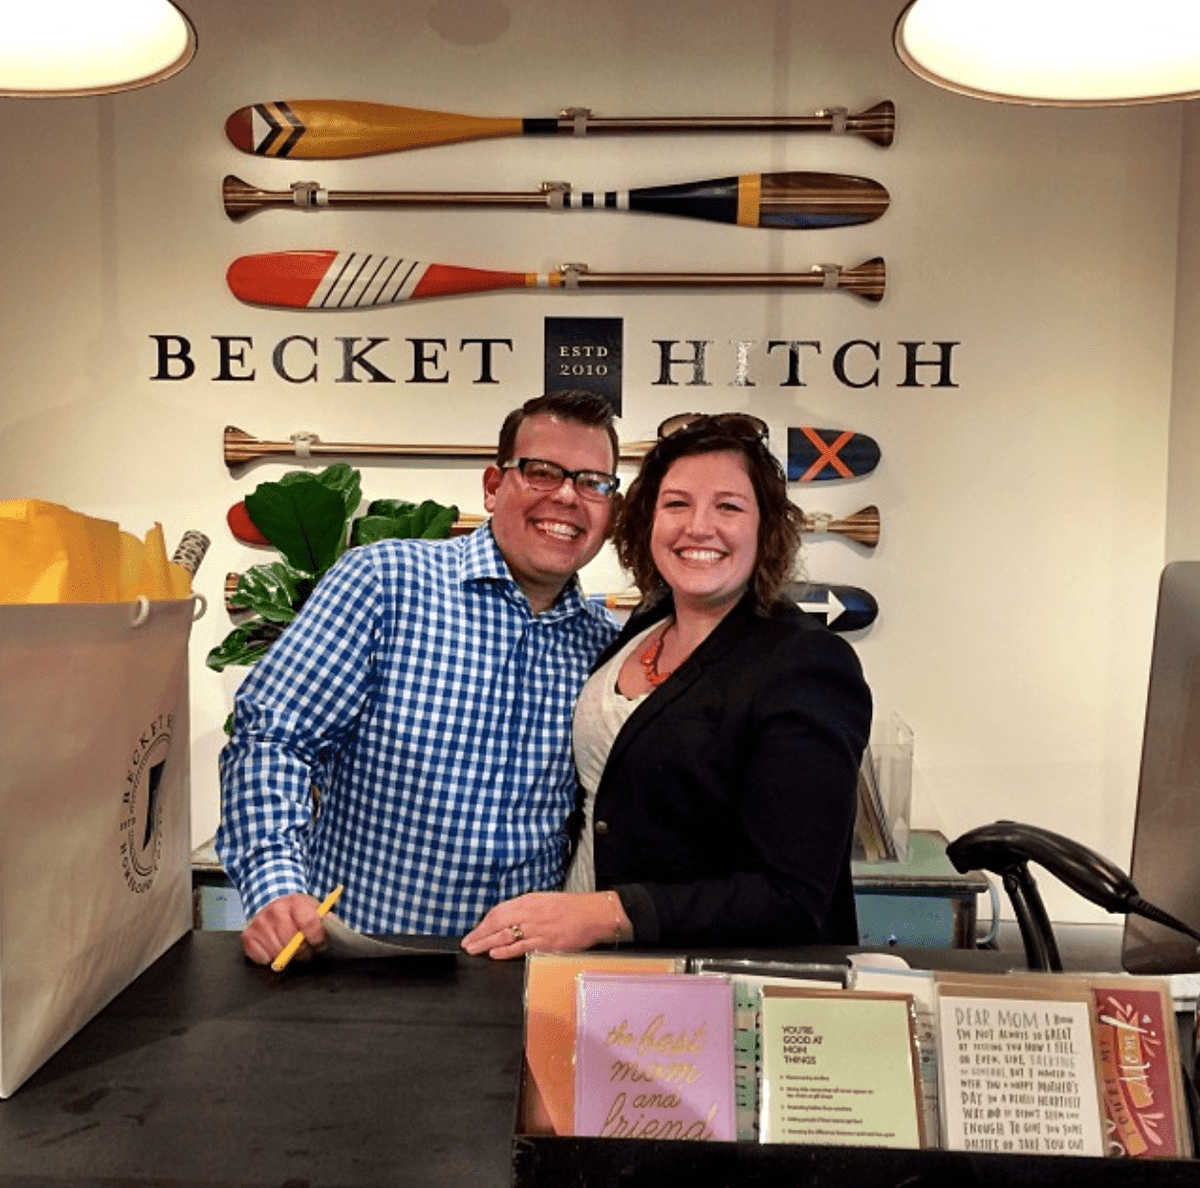 Becket Hitch is Open!